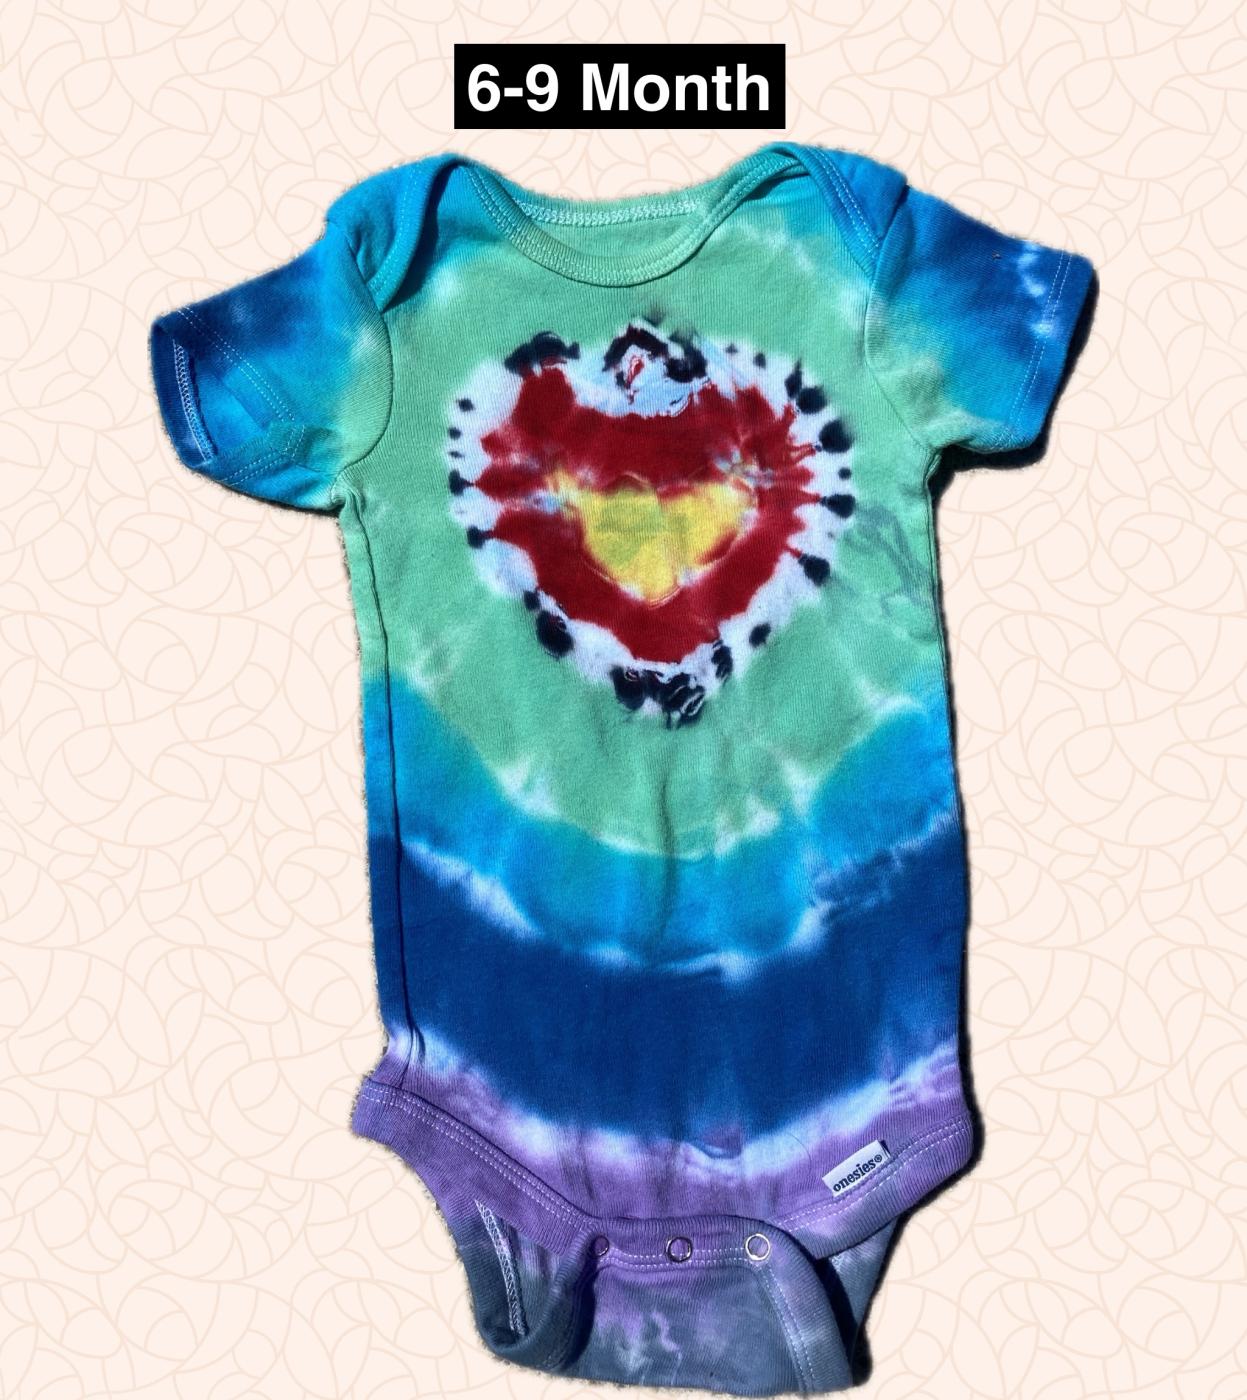 Red and Yellow Heart 6-9 Month Tie Dye Onesie